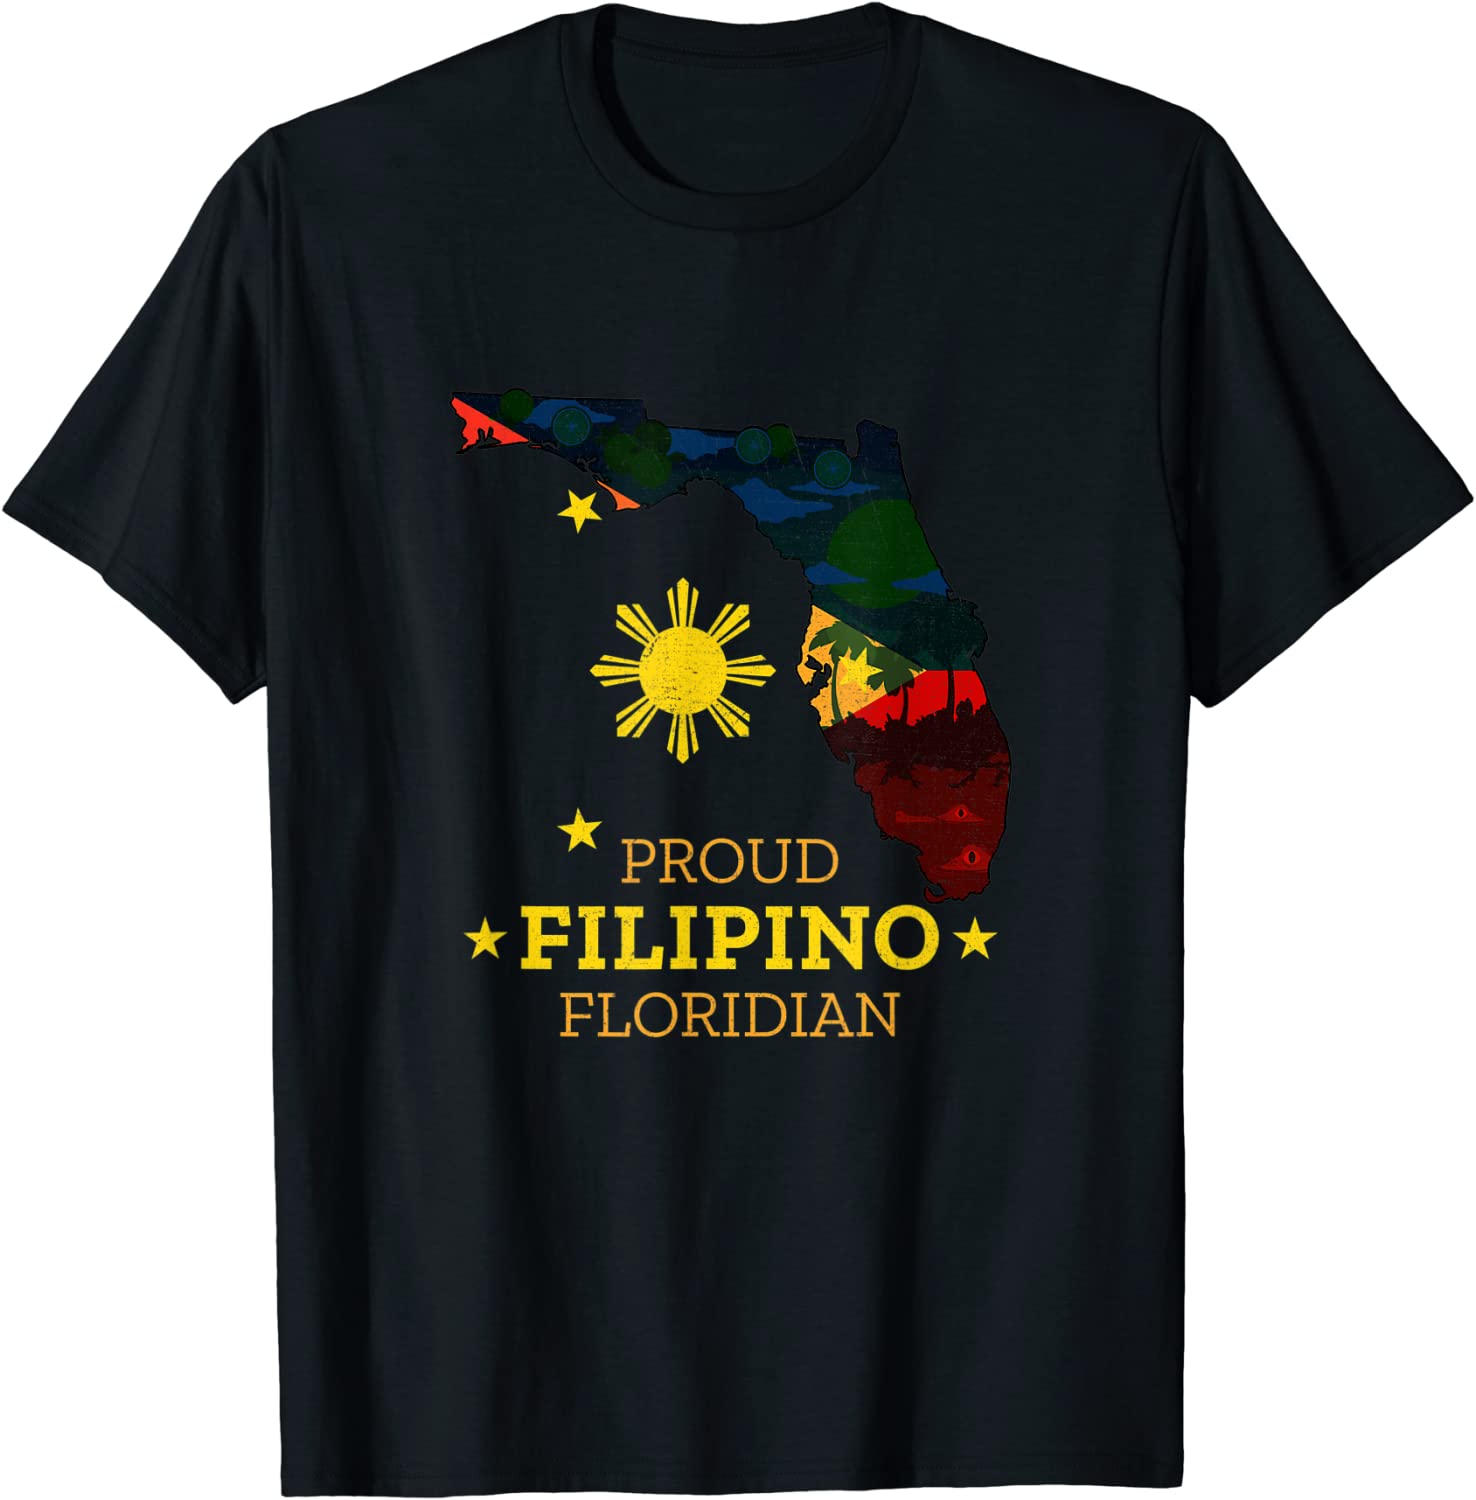 Proud Filipino Floridian - Florida Map and Philippines Flag T-Shirt ...